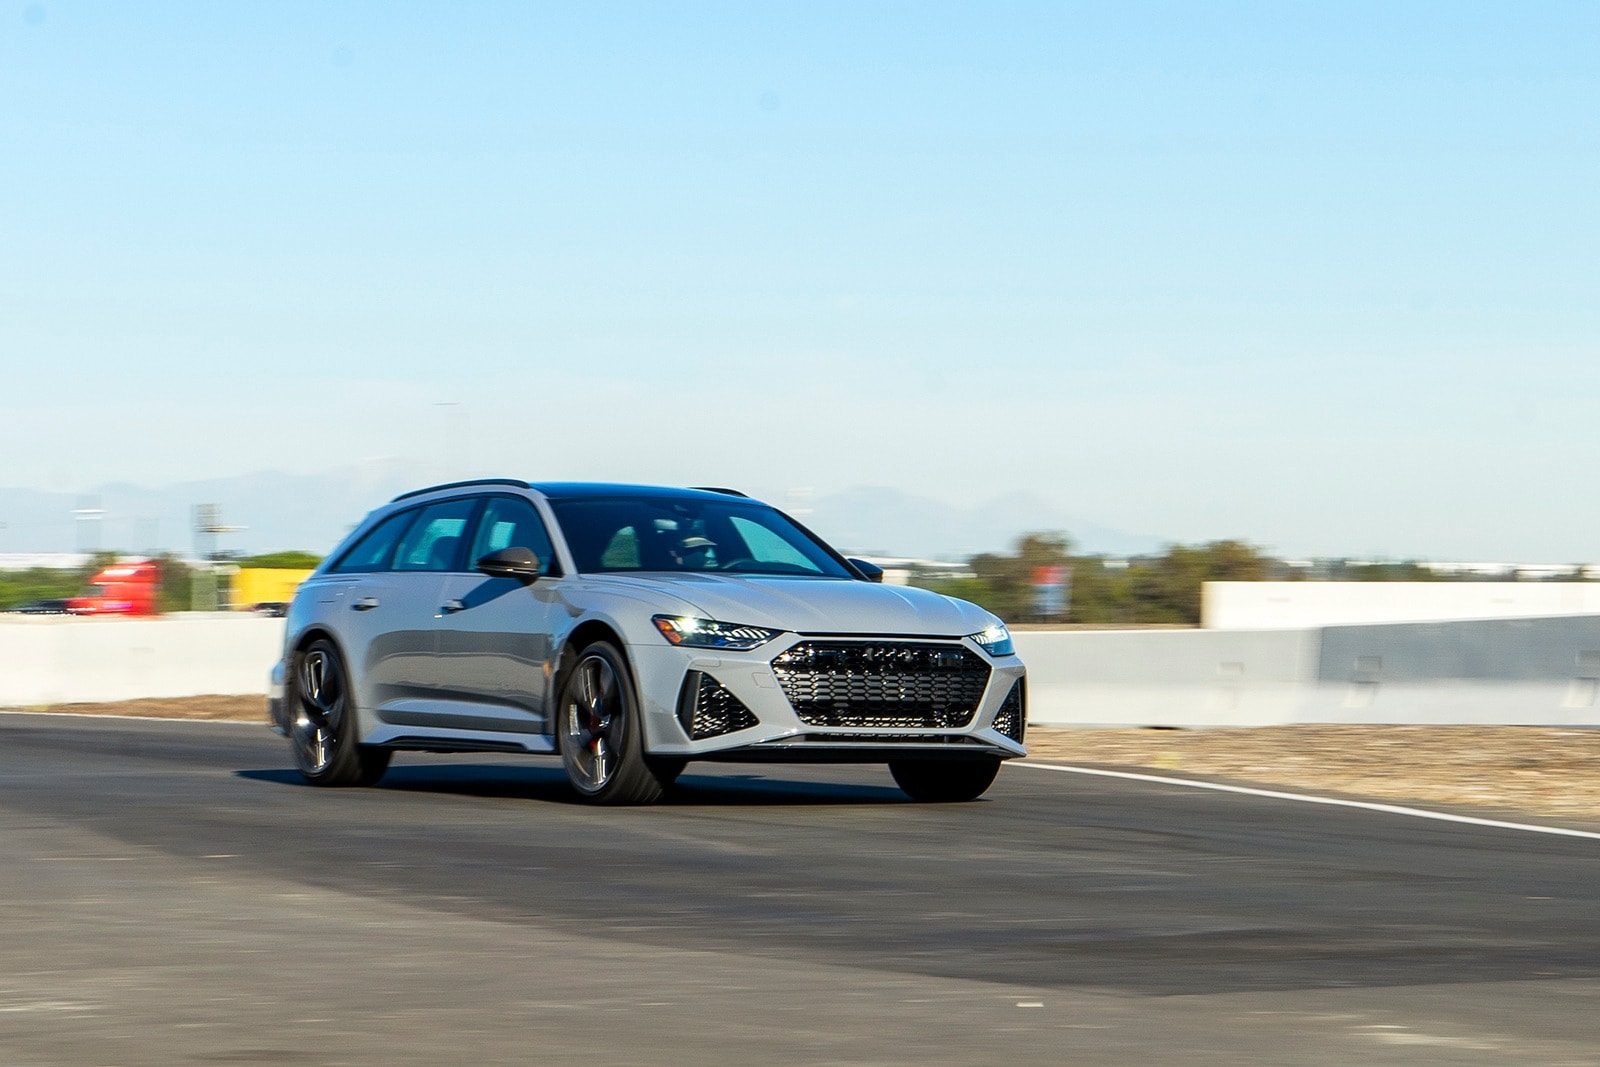 TESTED: 2021 Audi RS 6 Avant Combines Practicality With Mind-Bending Performance